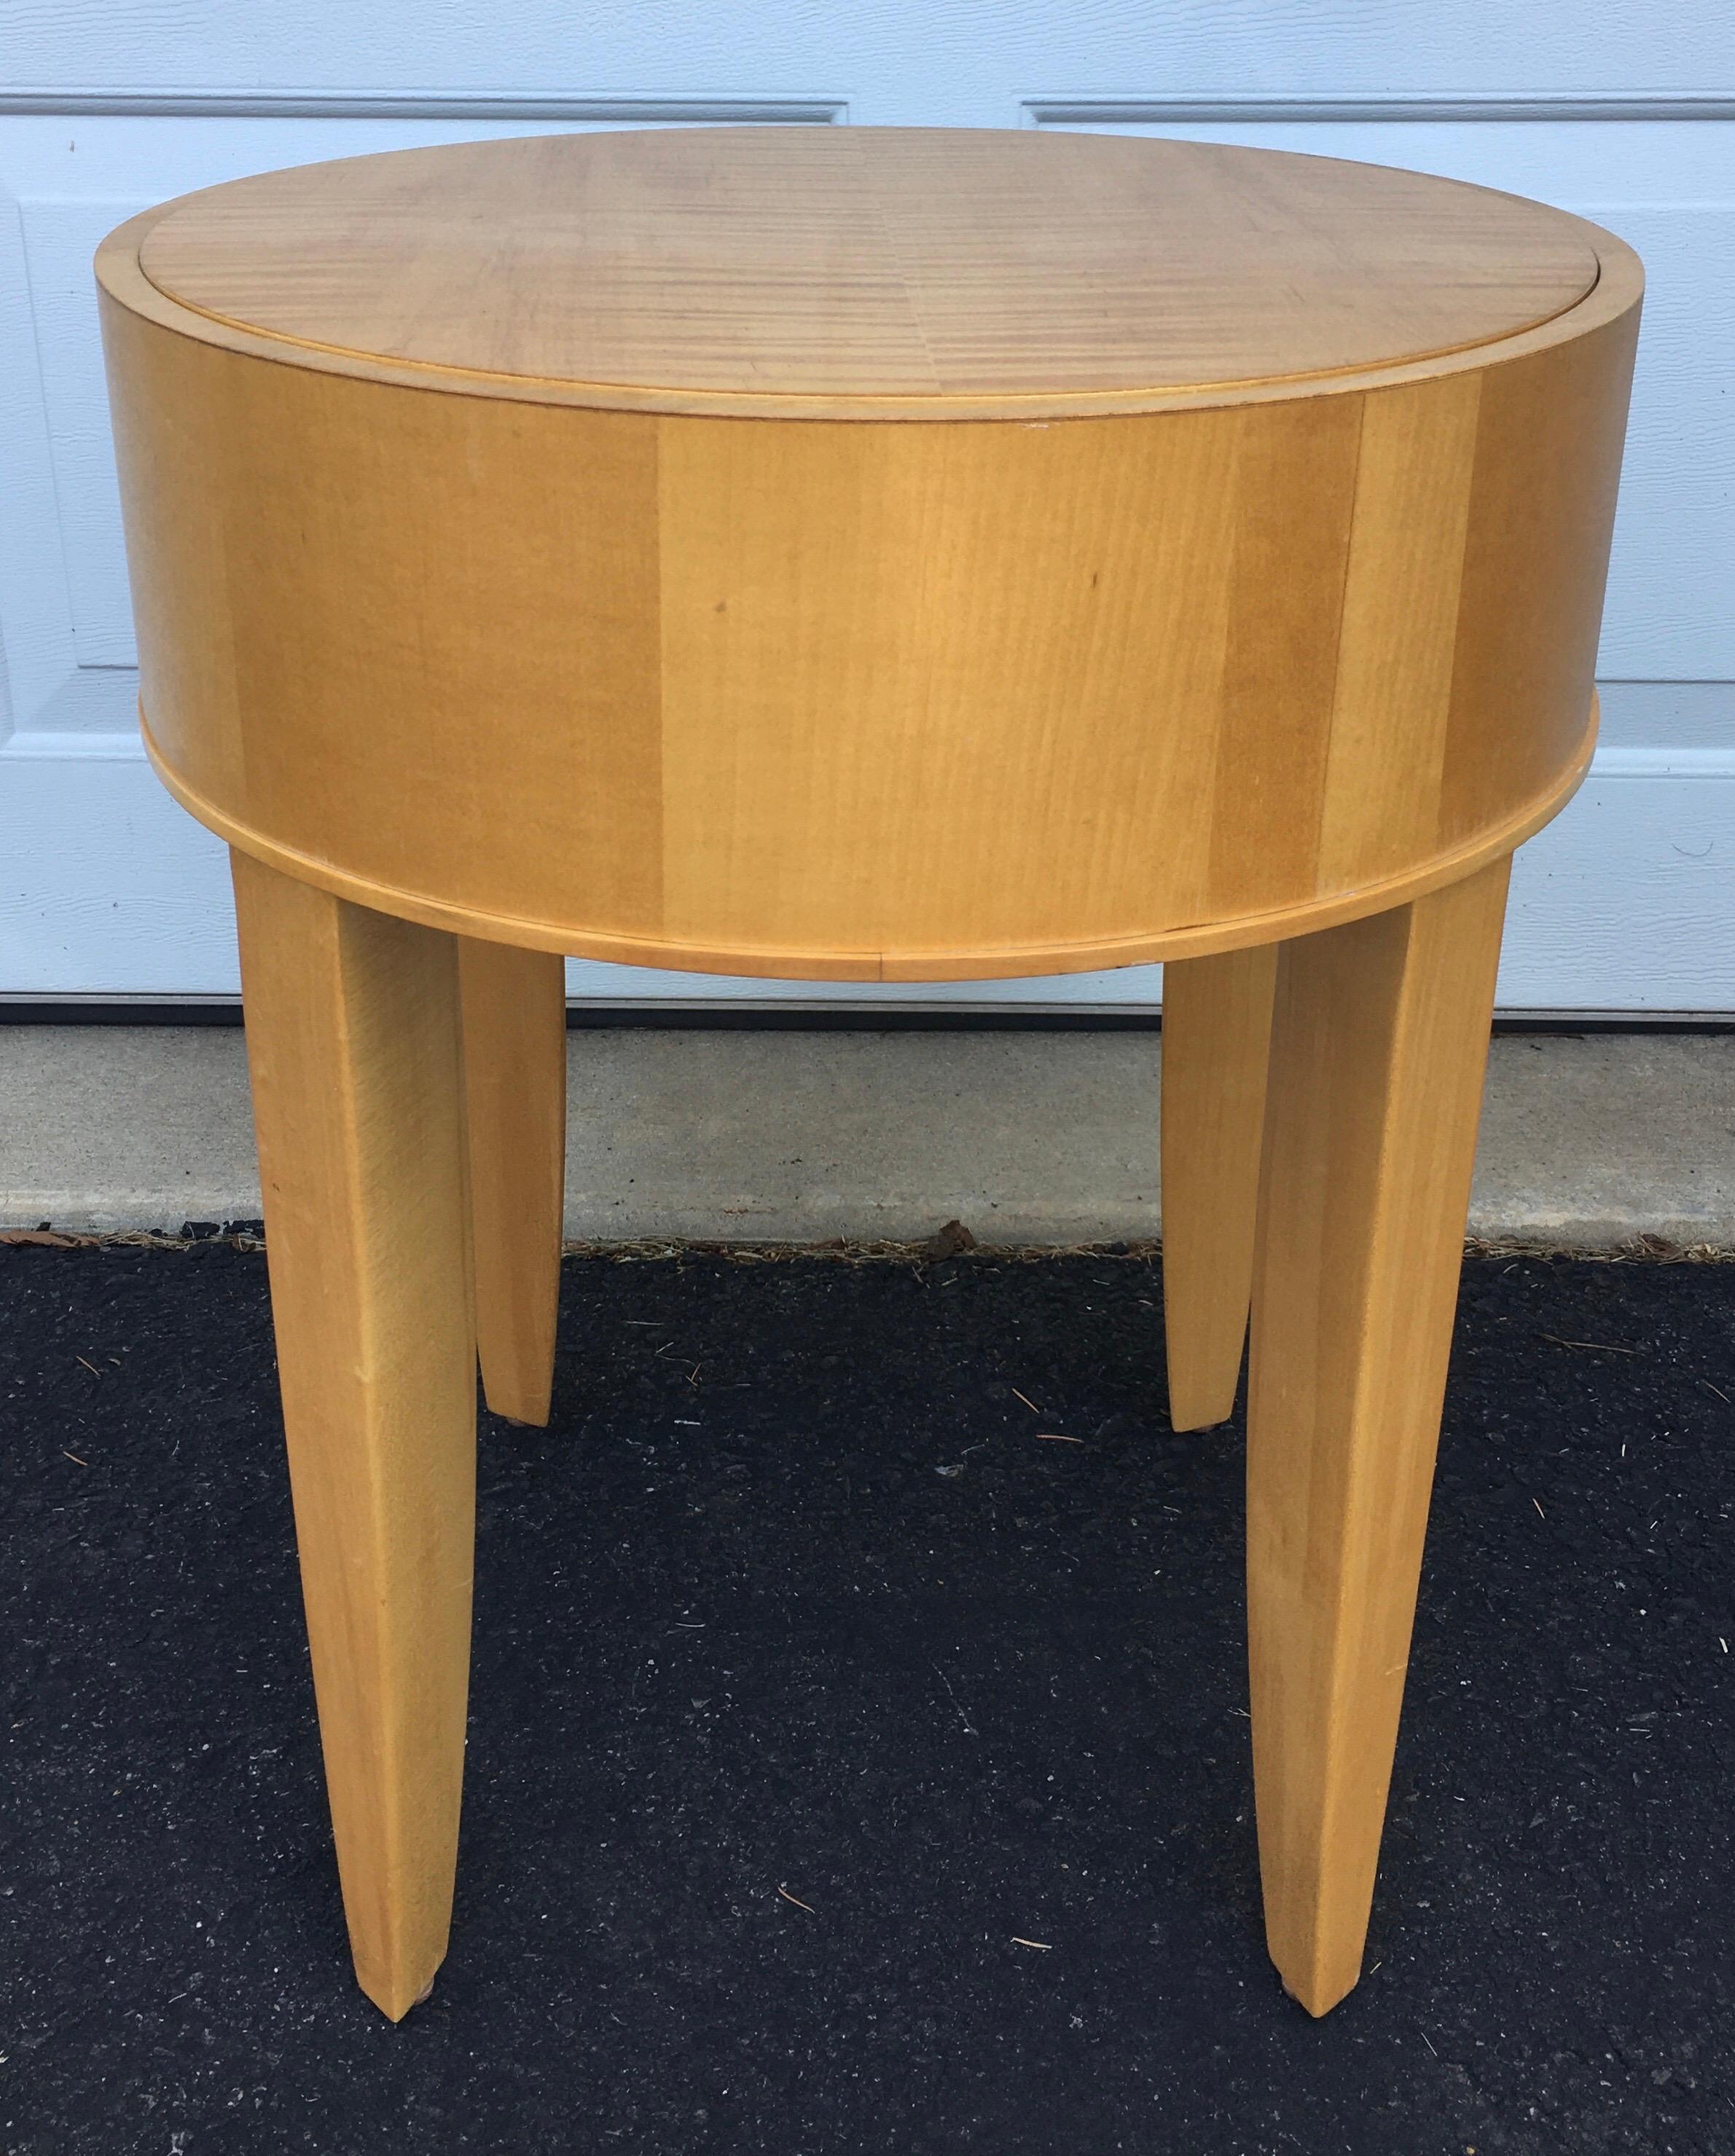 Round modern side table by Brayton International. This modern end occasional drinks tables features a natural tone maple wood veneer. Original manufacturers label on bottom of table.